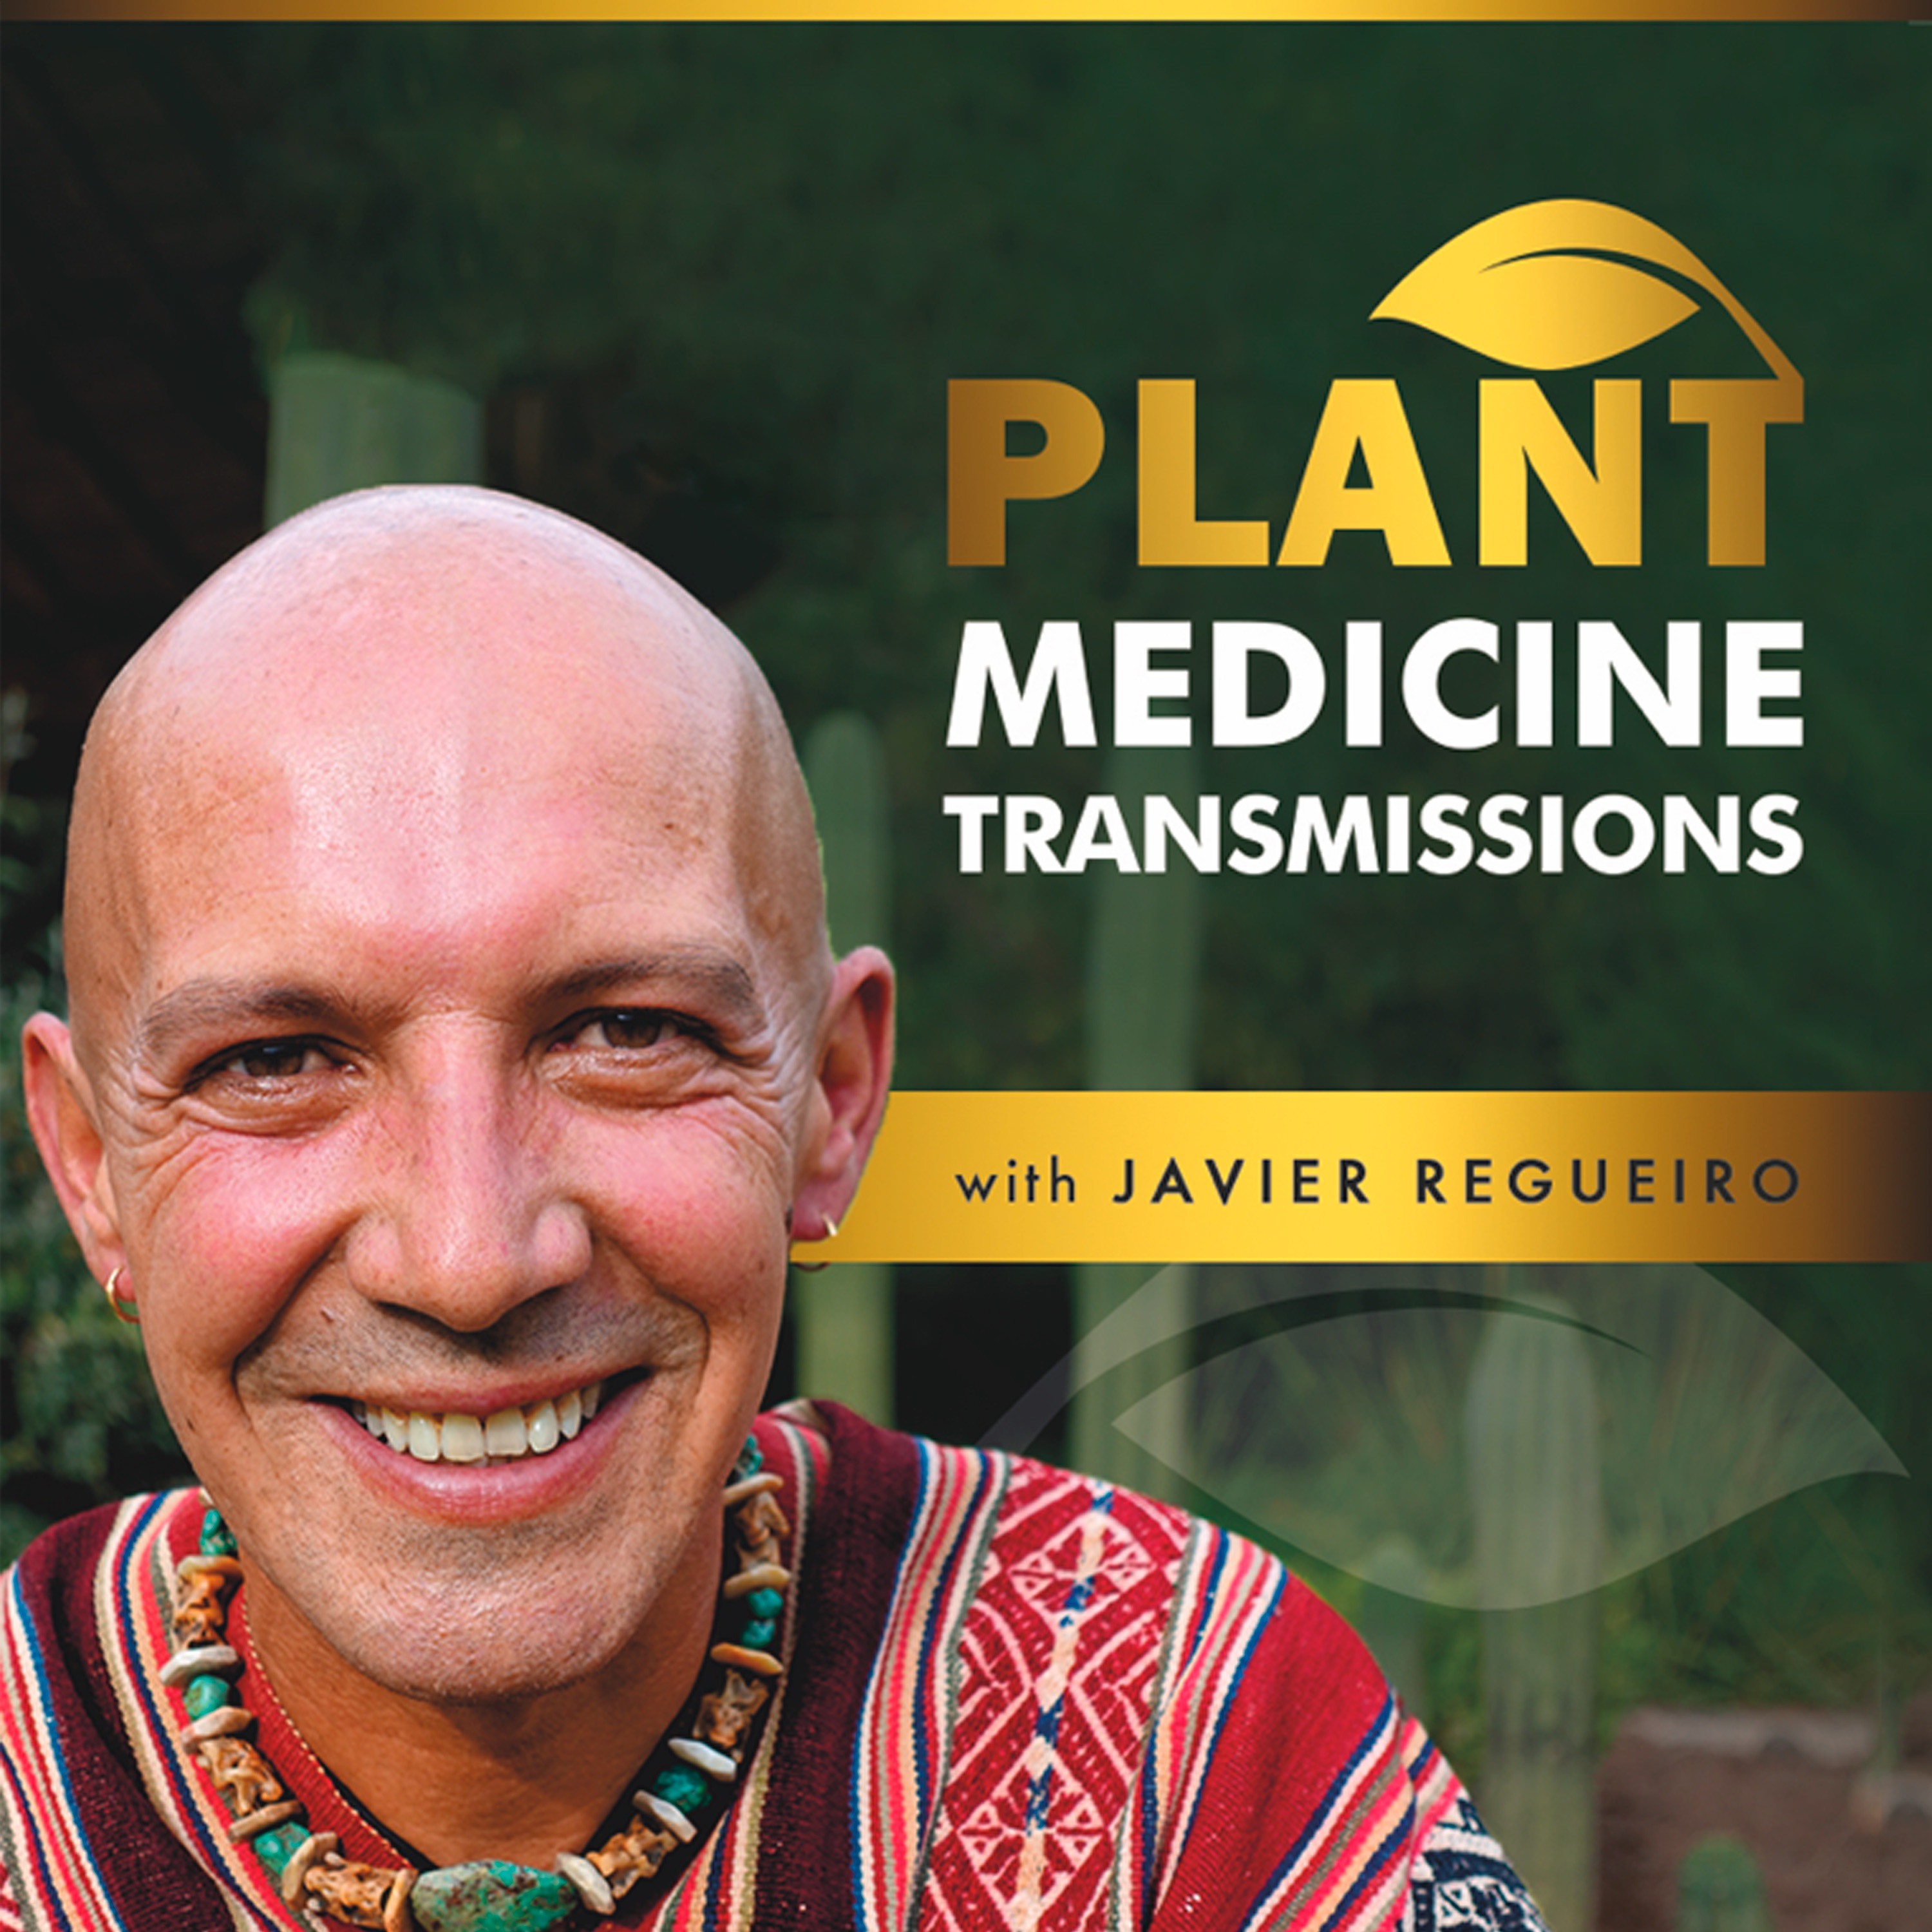 #33 - PLANT MEDICINE LESSONS  IN PANDEMIC TIMES II